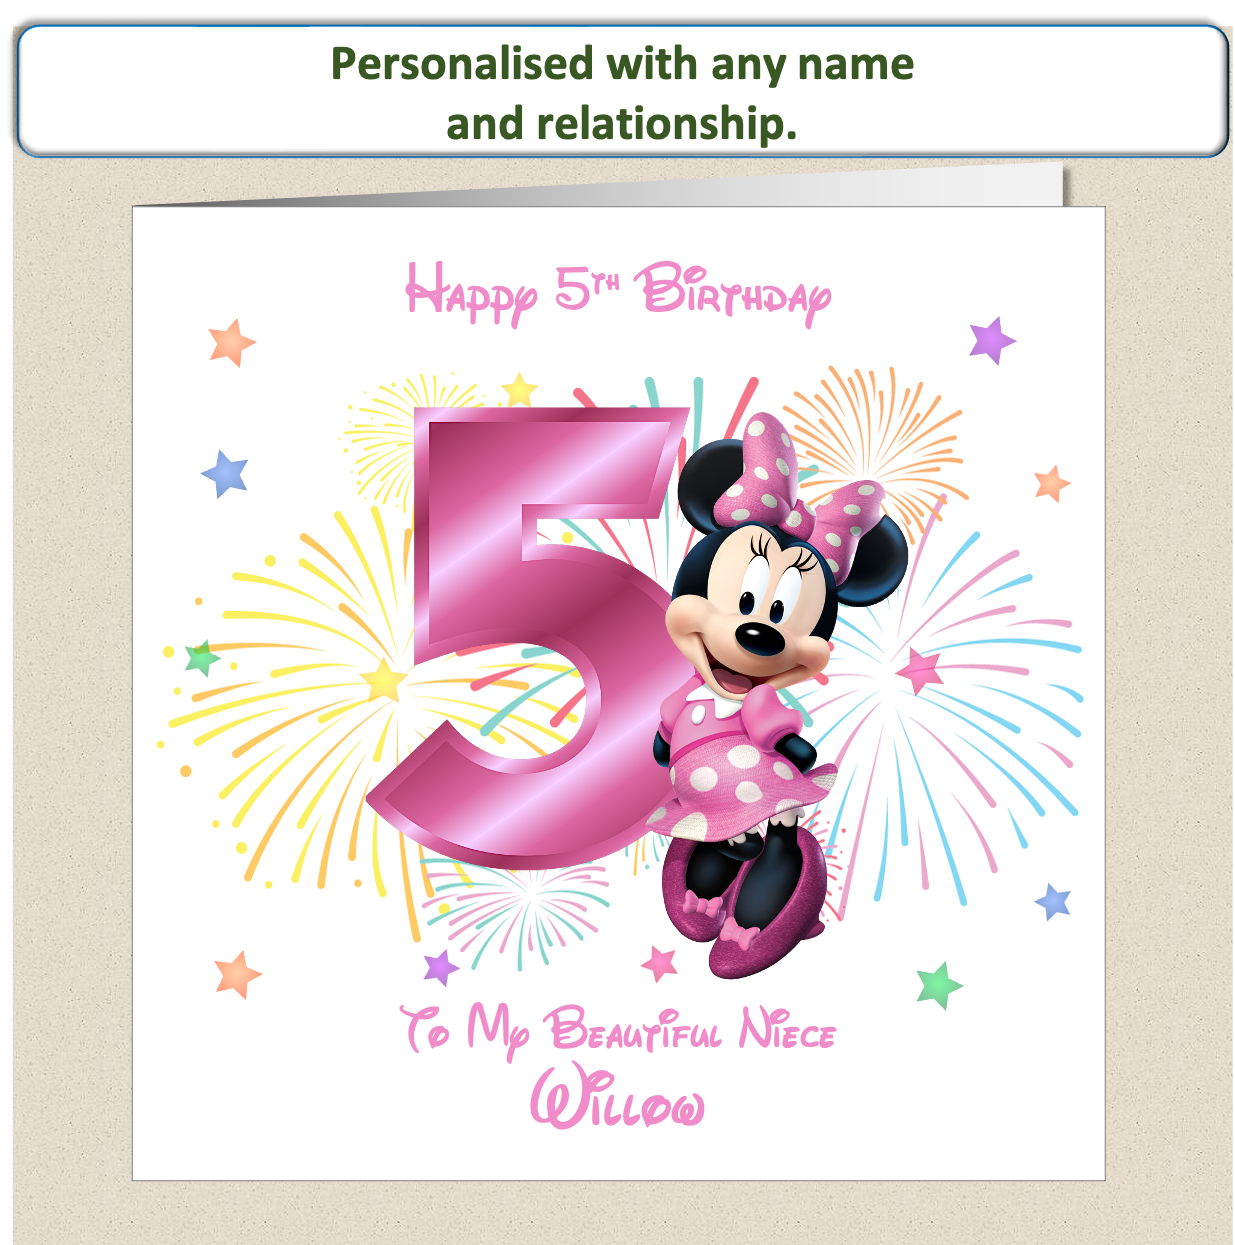 Personalised Minnie Mouse Birthday Card - 5th Birthday